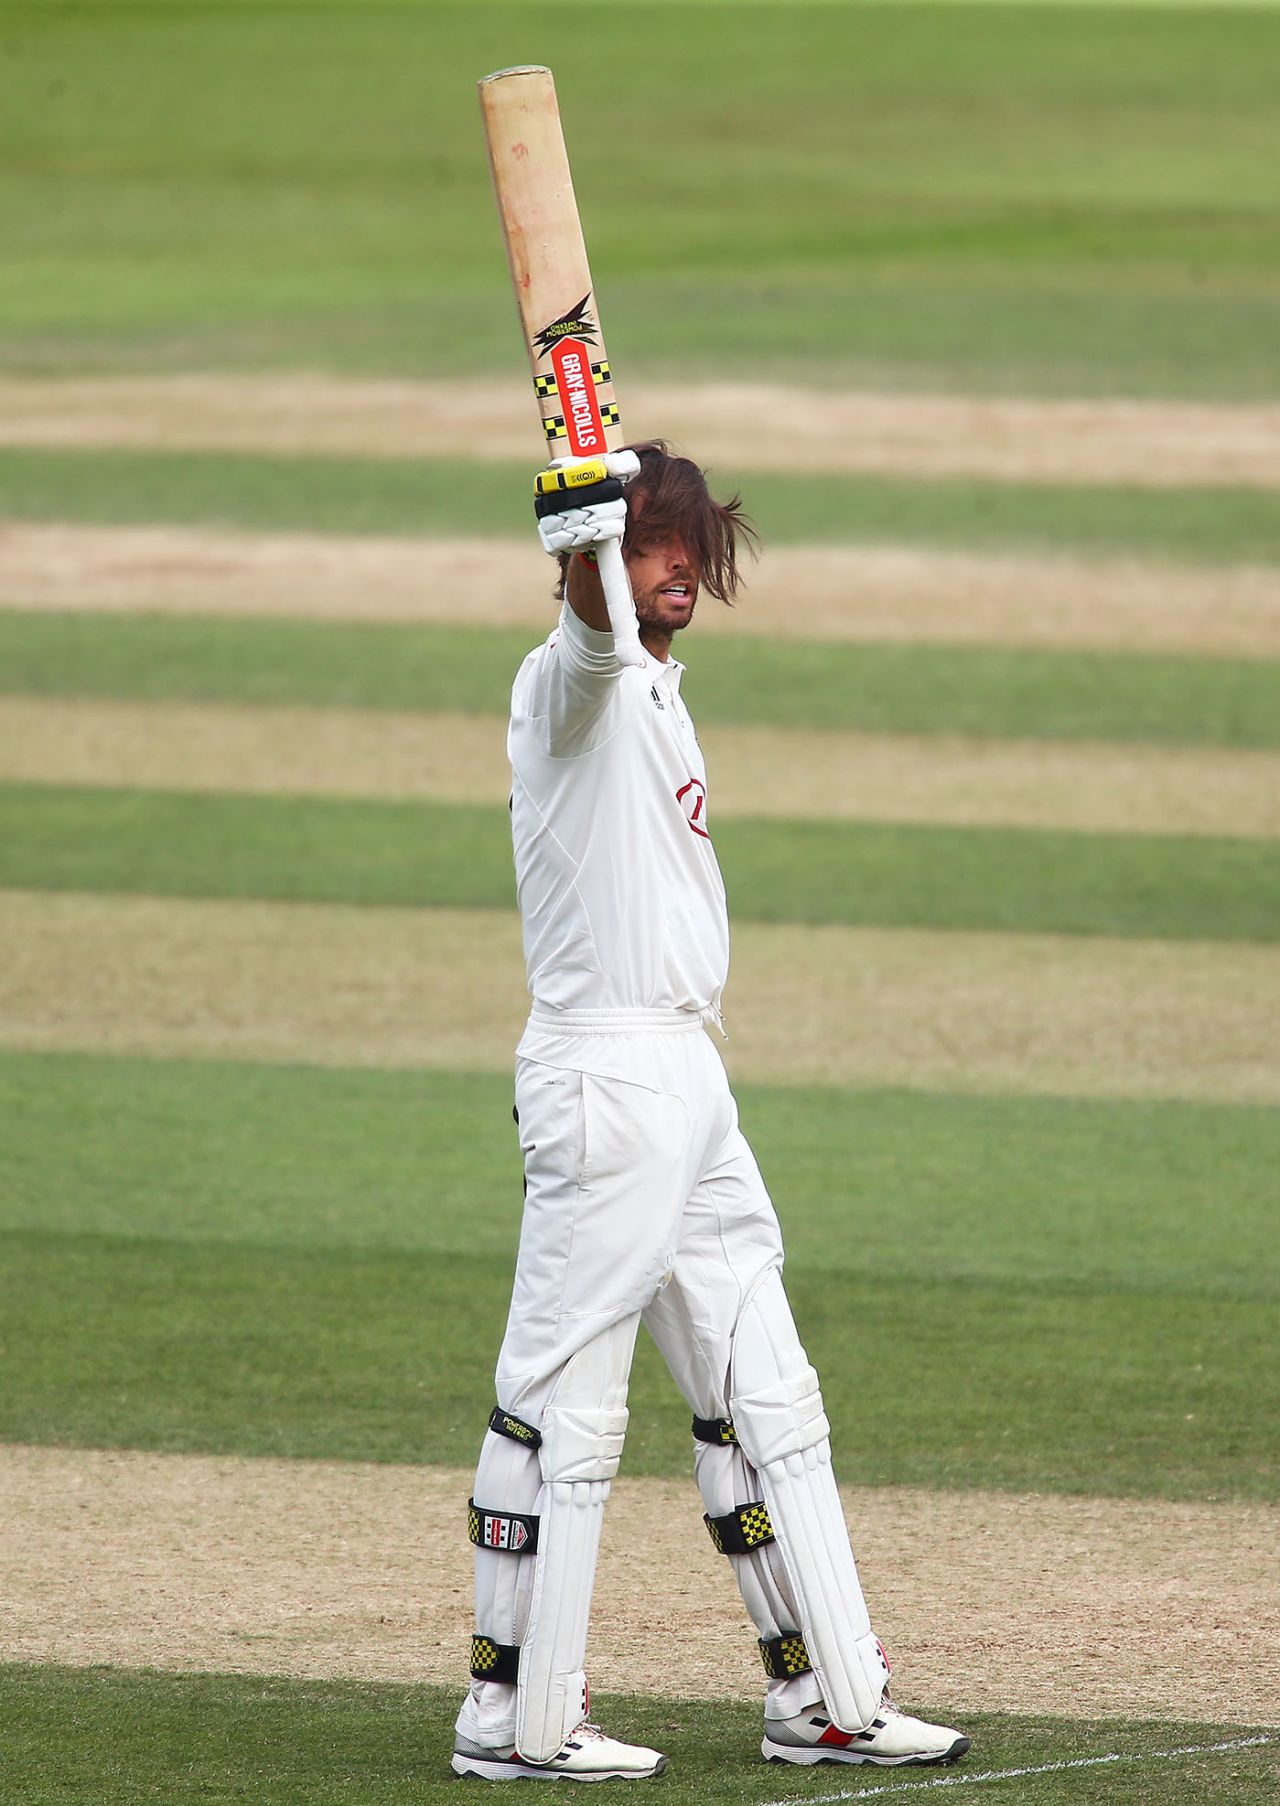 Ben Foakes acknowledges his hundred, Surrey v Kent, The Oval, 3rd day, Bob Willis Trophy, August 24, 2020